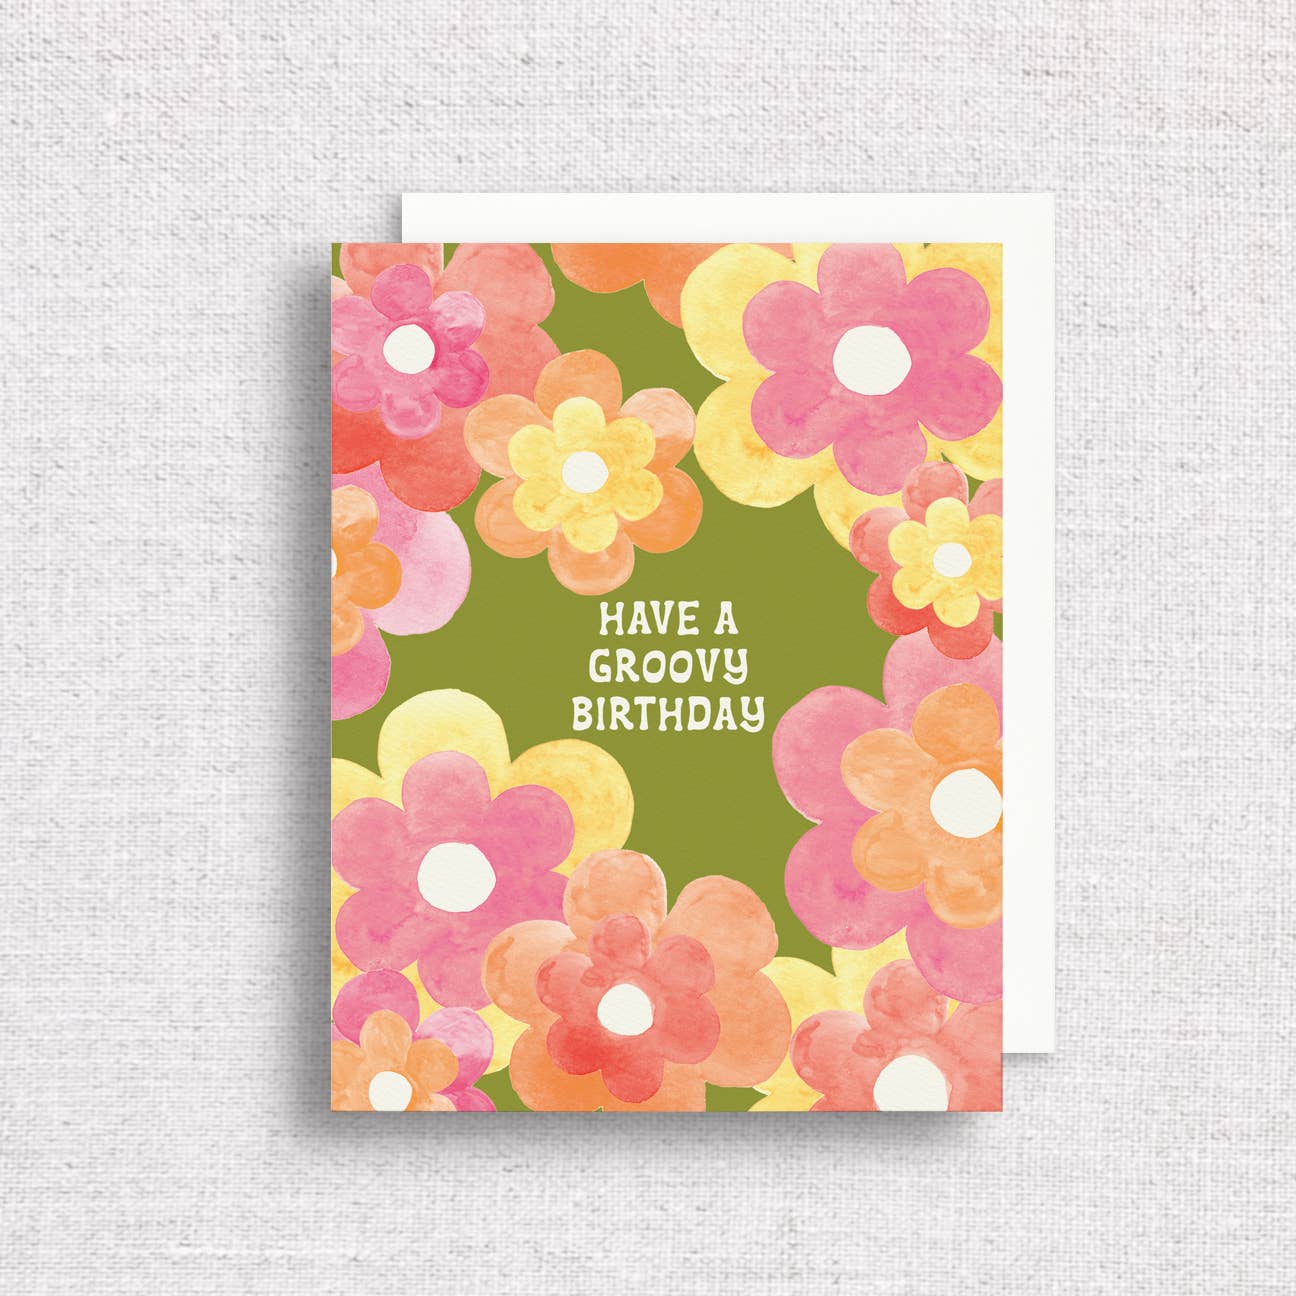 Have a Groovy Birthday Greeting Card | 70s Retro Flowers